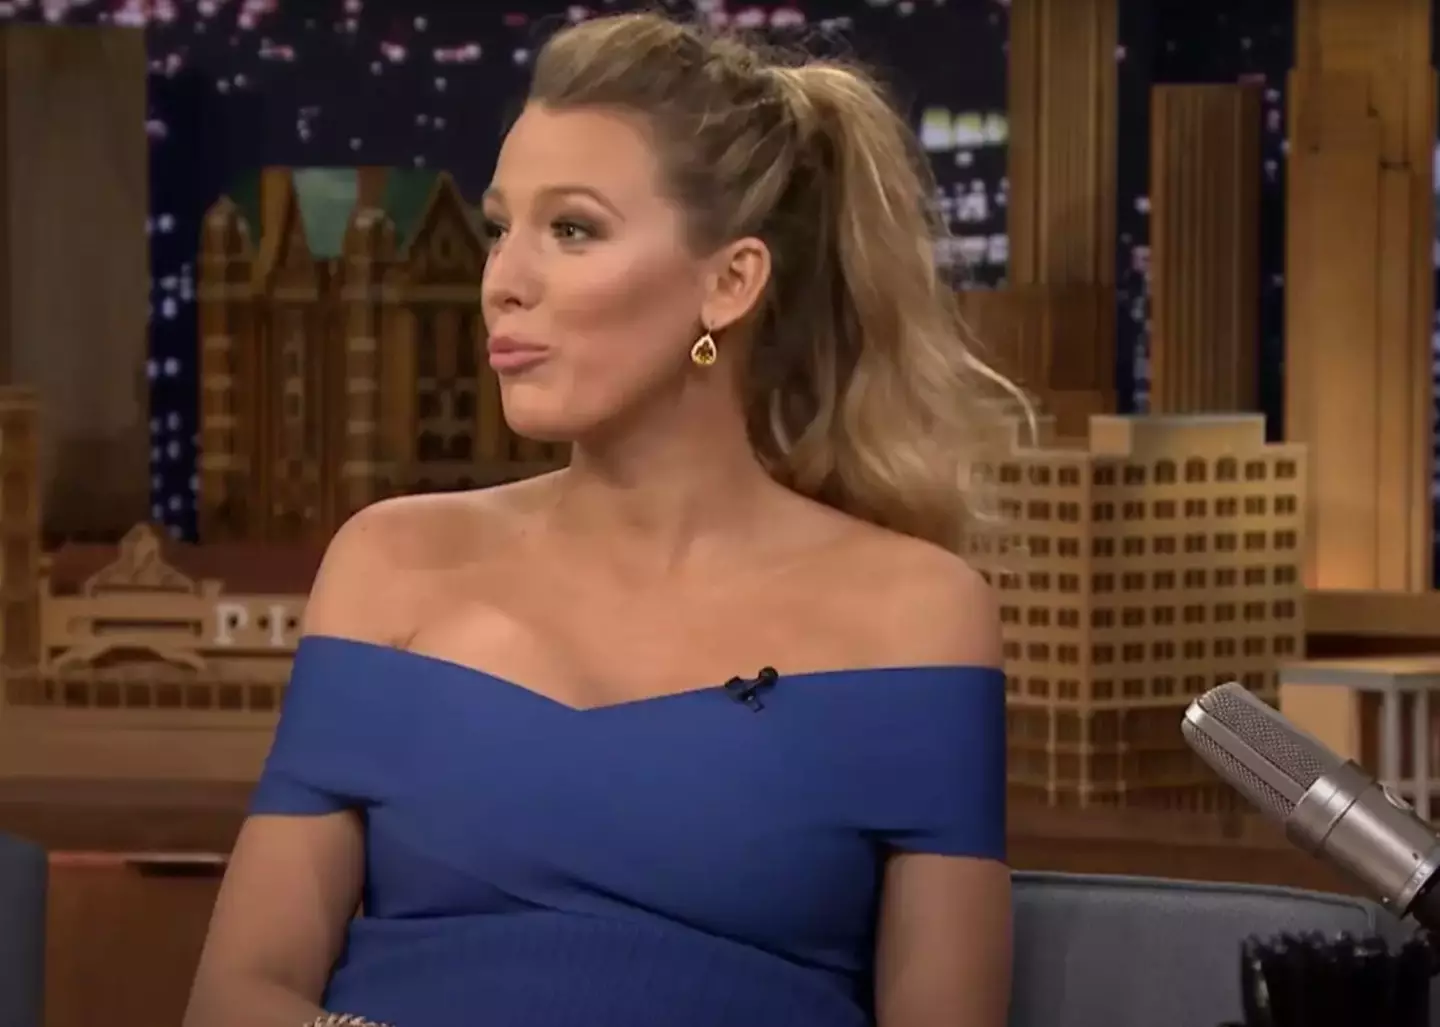 Blake Lively did not enjoy watching Reynolds get mashed potato eaten out of his butt, unsurprisingly.